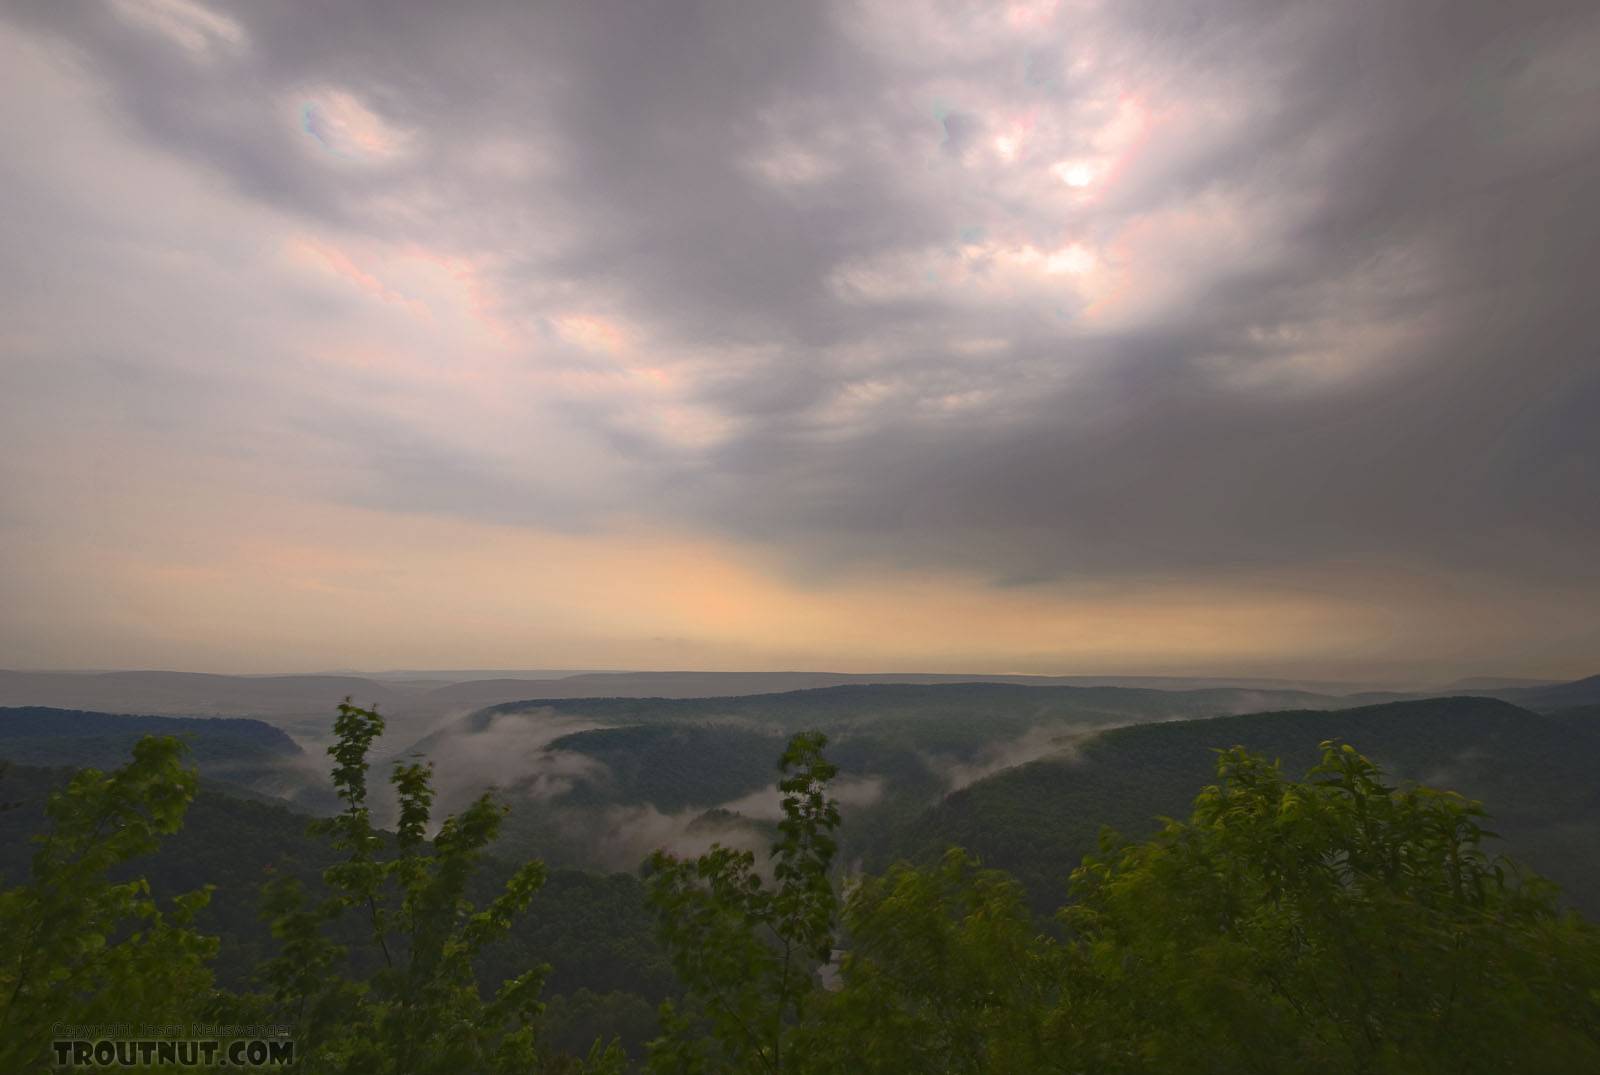 A trout stream valley covered in mist after a spring thunderstorm on a hot, humid day. From Penn's Creek in Pennsylvania.